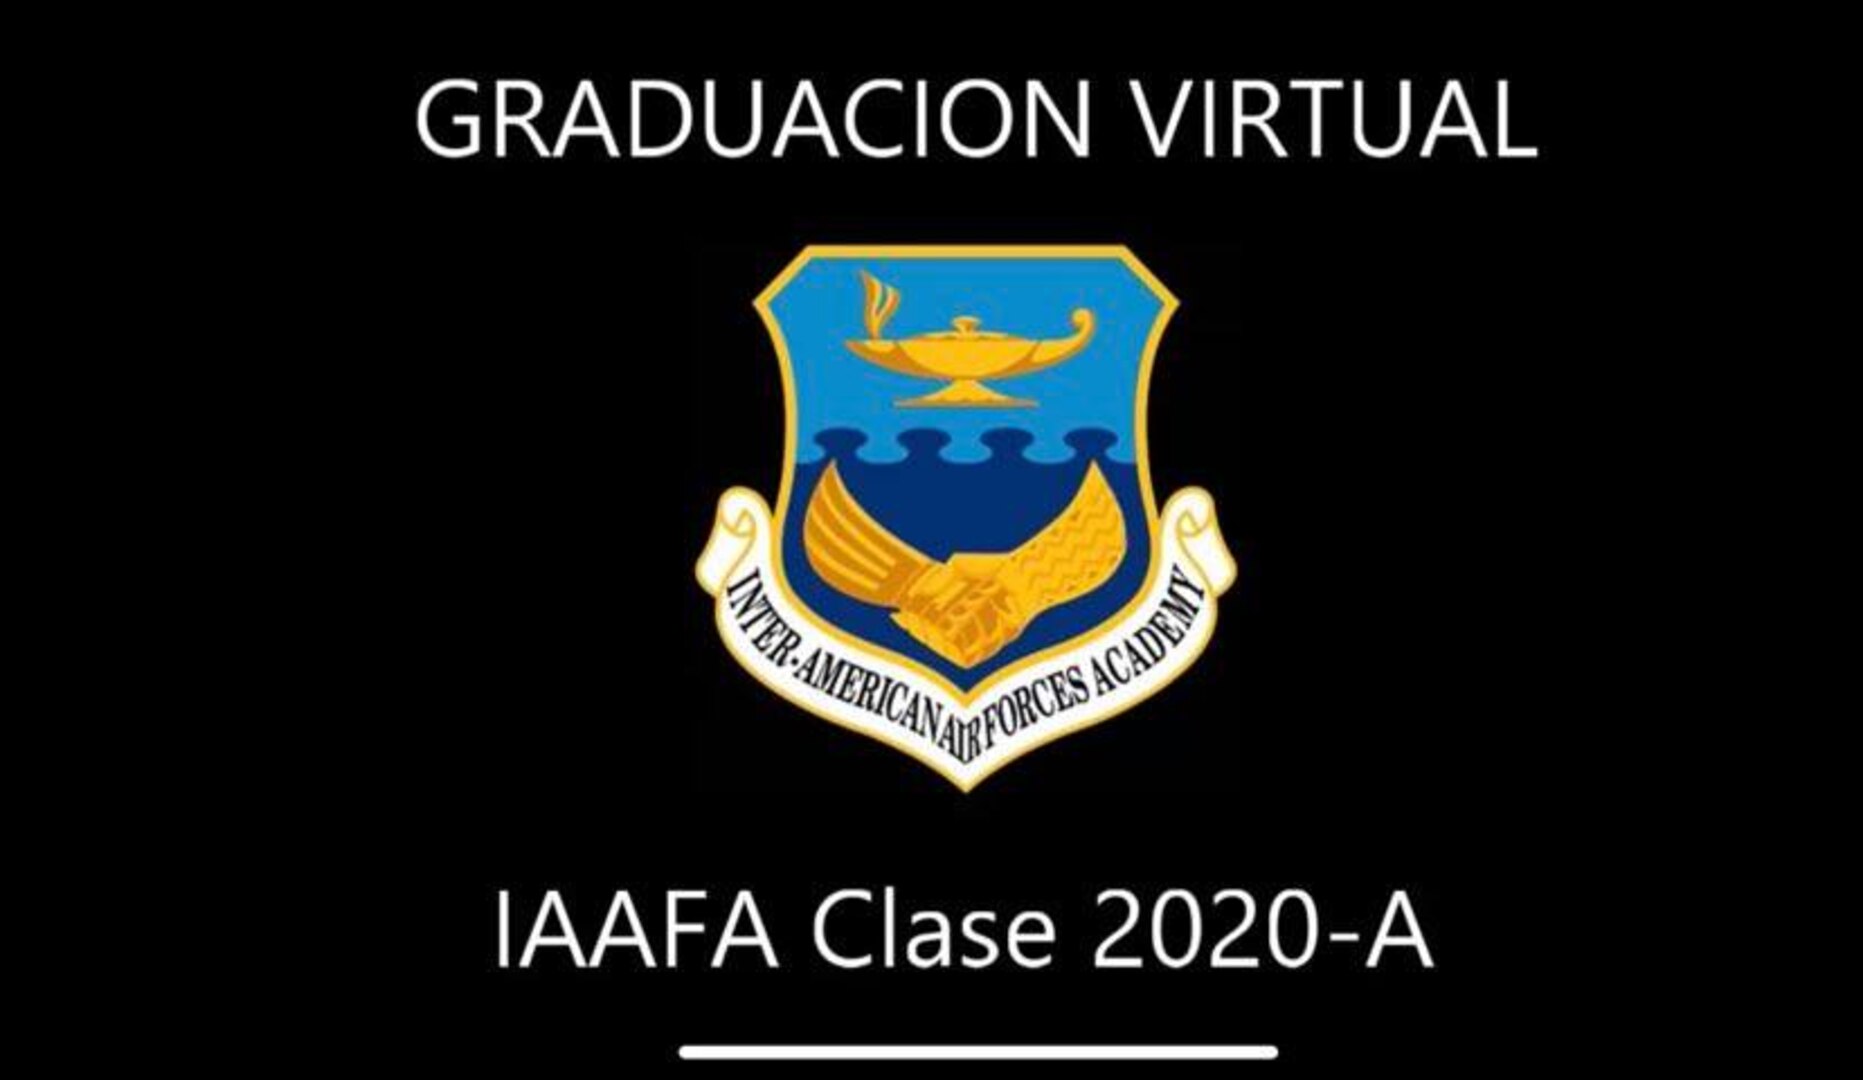 The Inter-American Air Forces Academy celebrates the graduation of its 2020 Alpha Cycle students, May 15, from countries across the Americas who studied professional military education via distance learning.(Courtesy Photo)